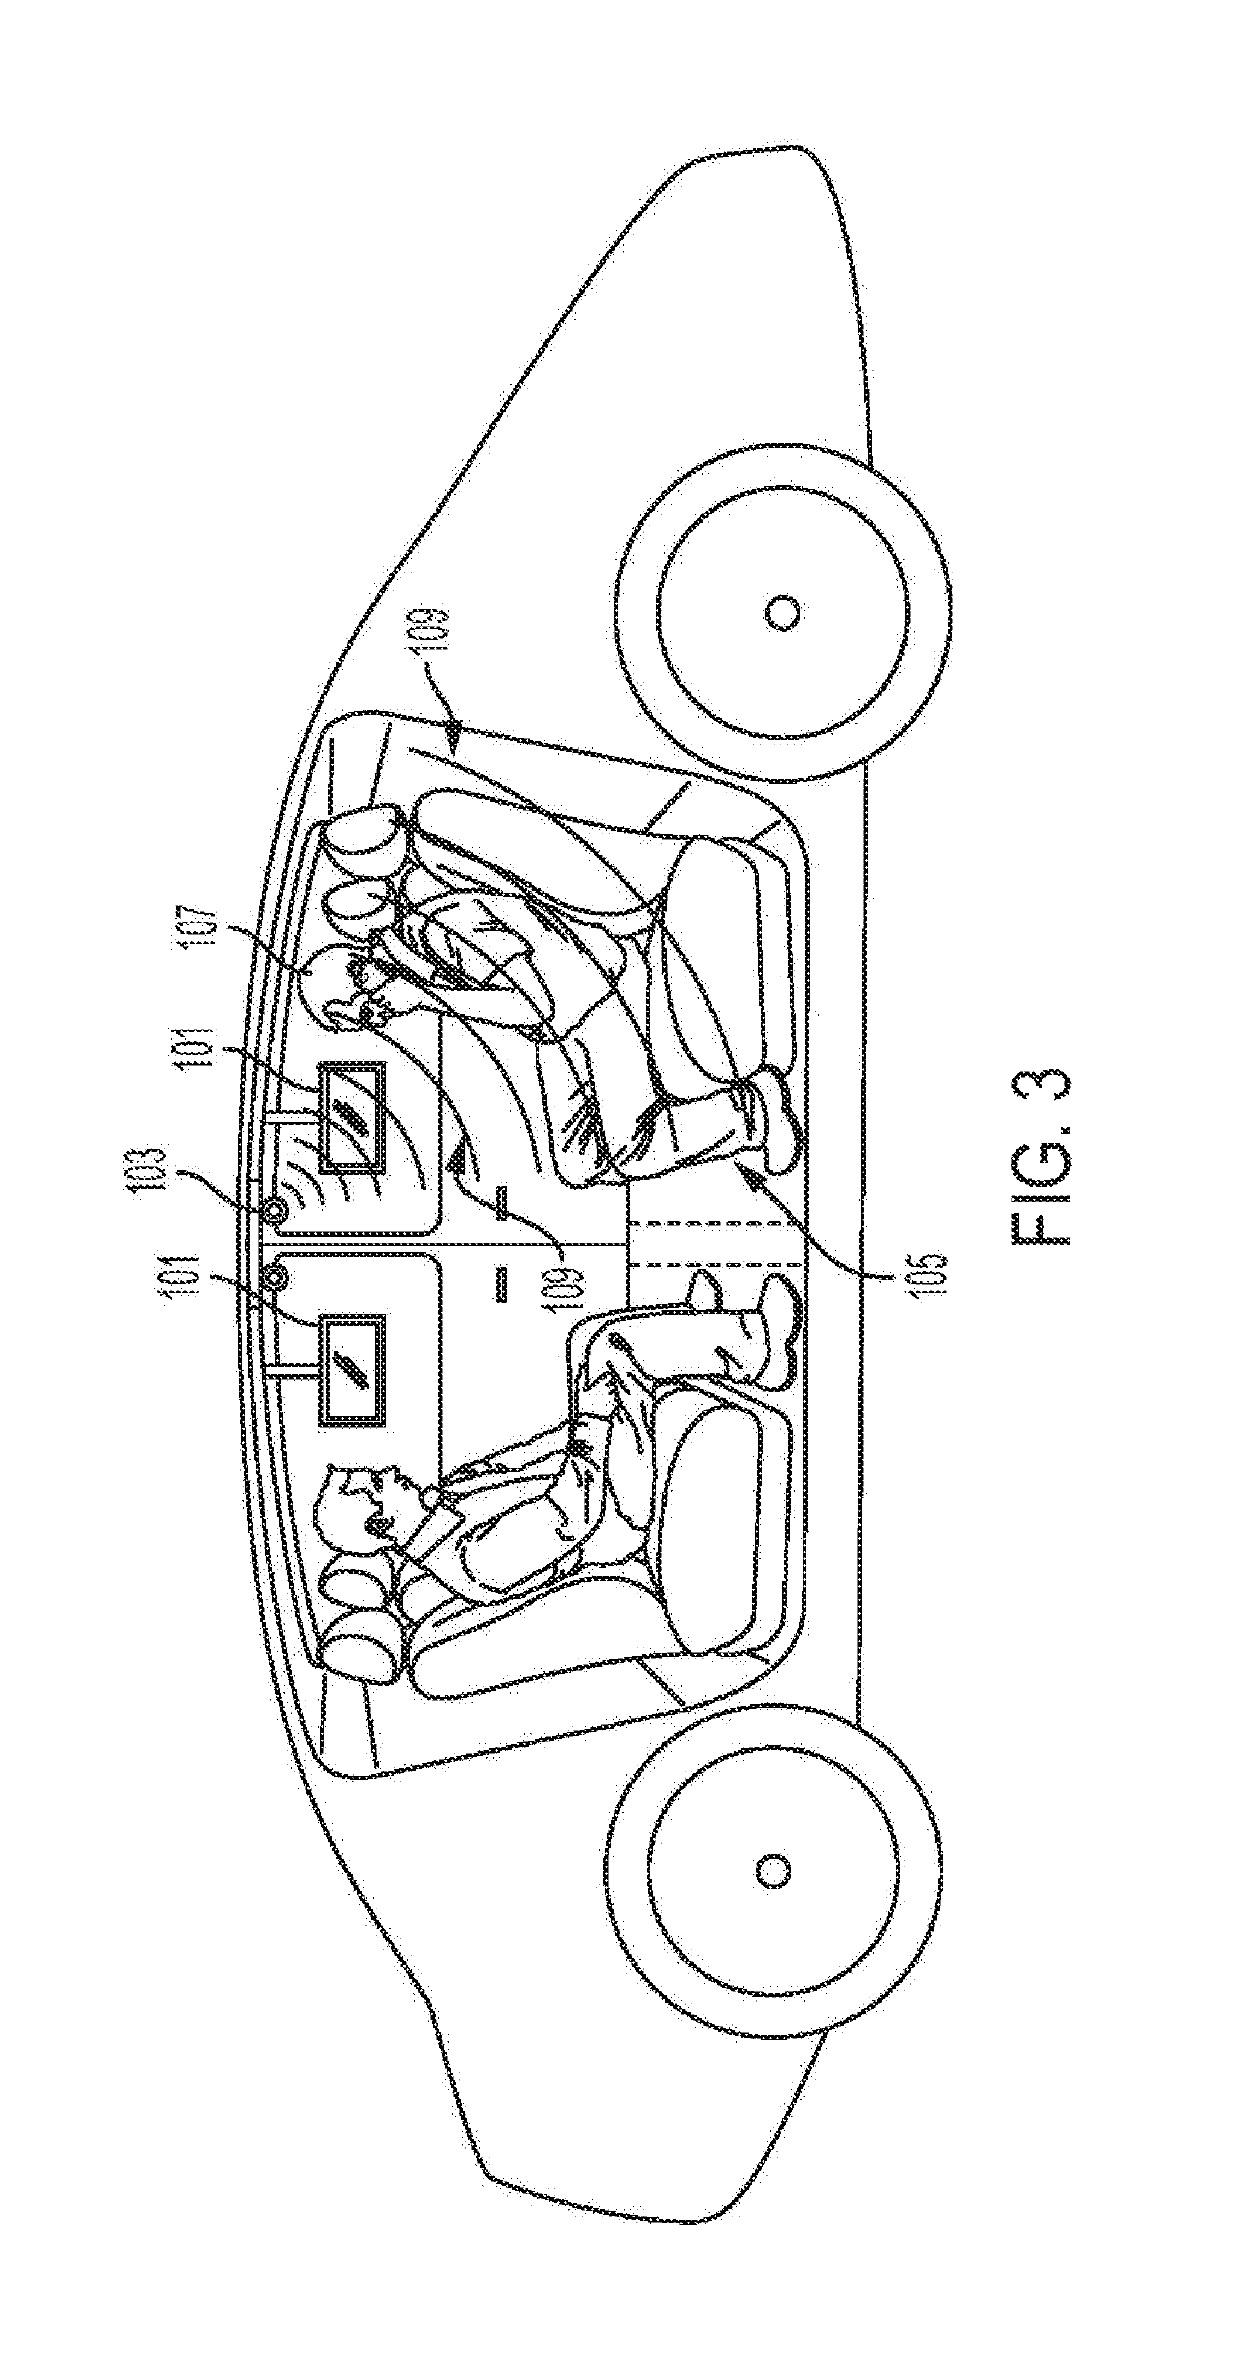 Method and system to mask occupant sounds in a ride sharing environment